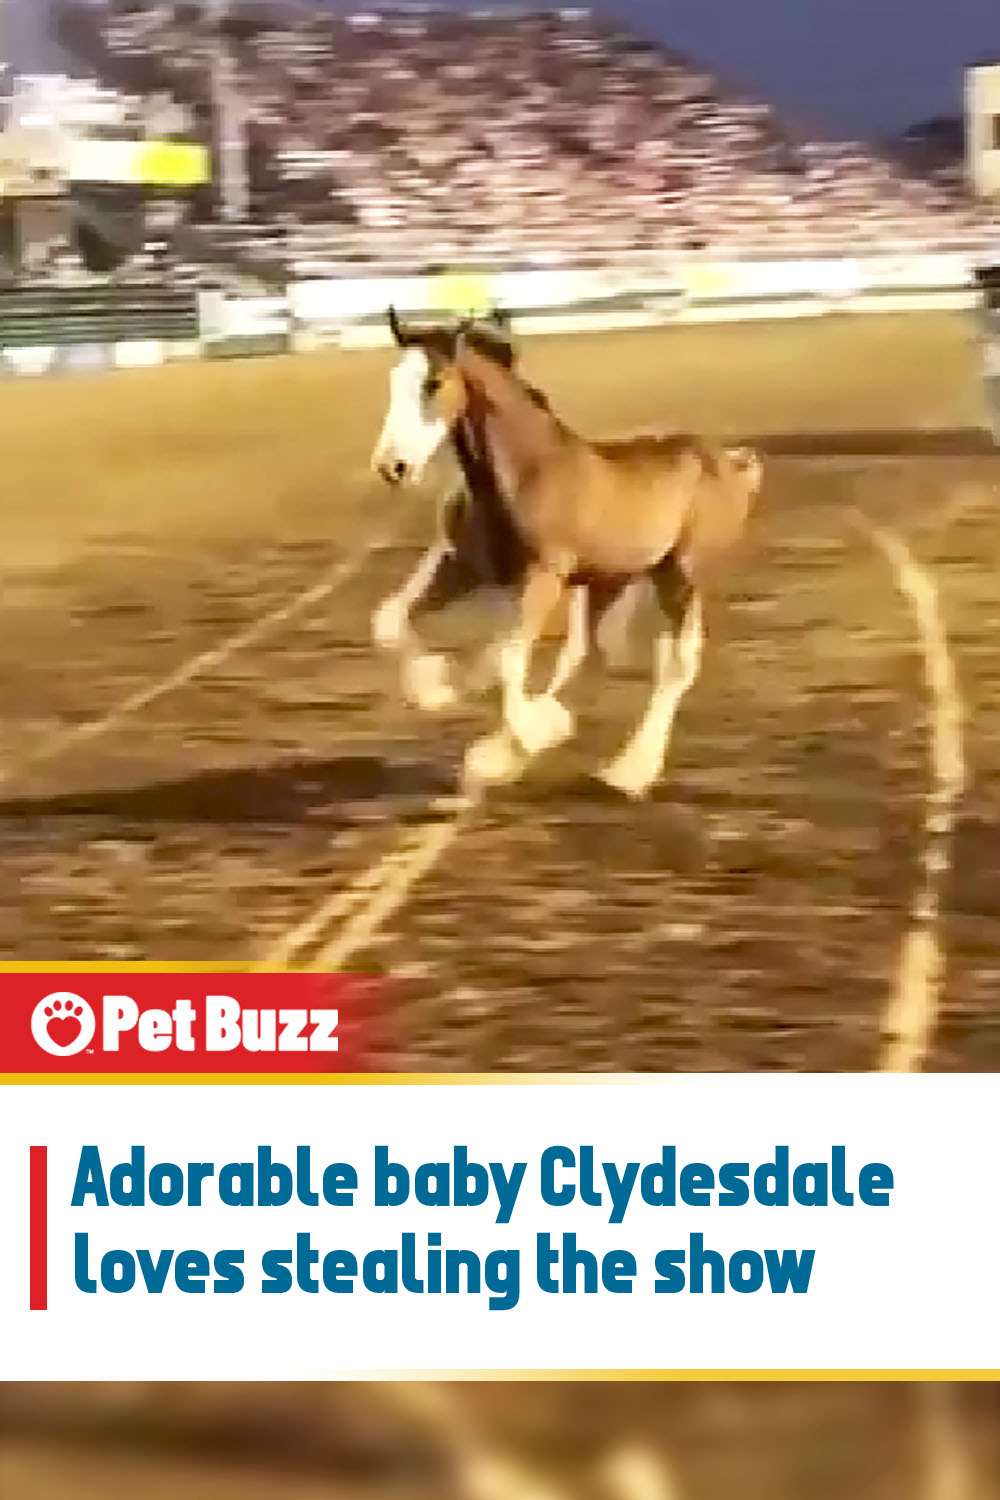 Adorable baby Clydesdale loves stealing the show